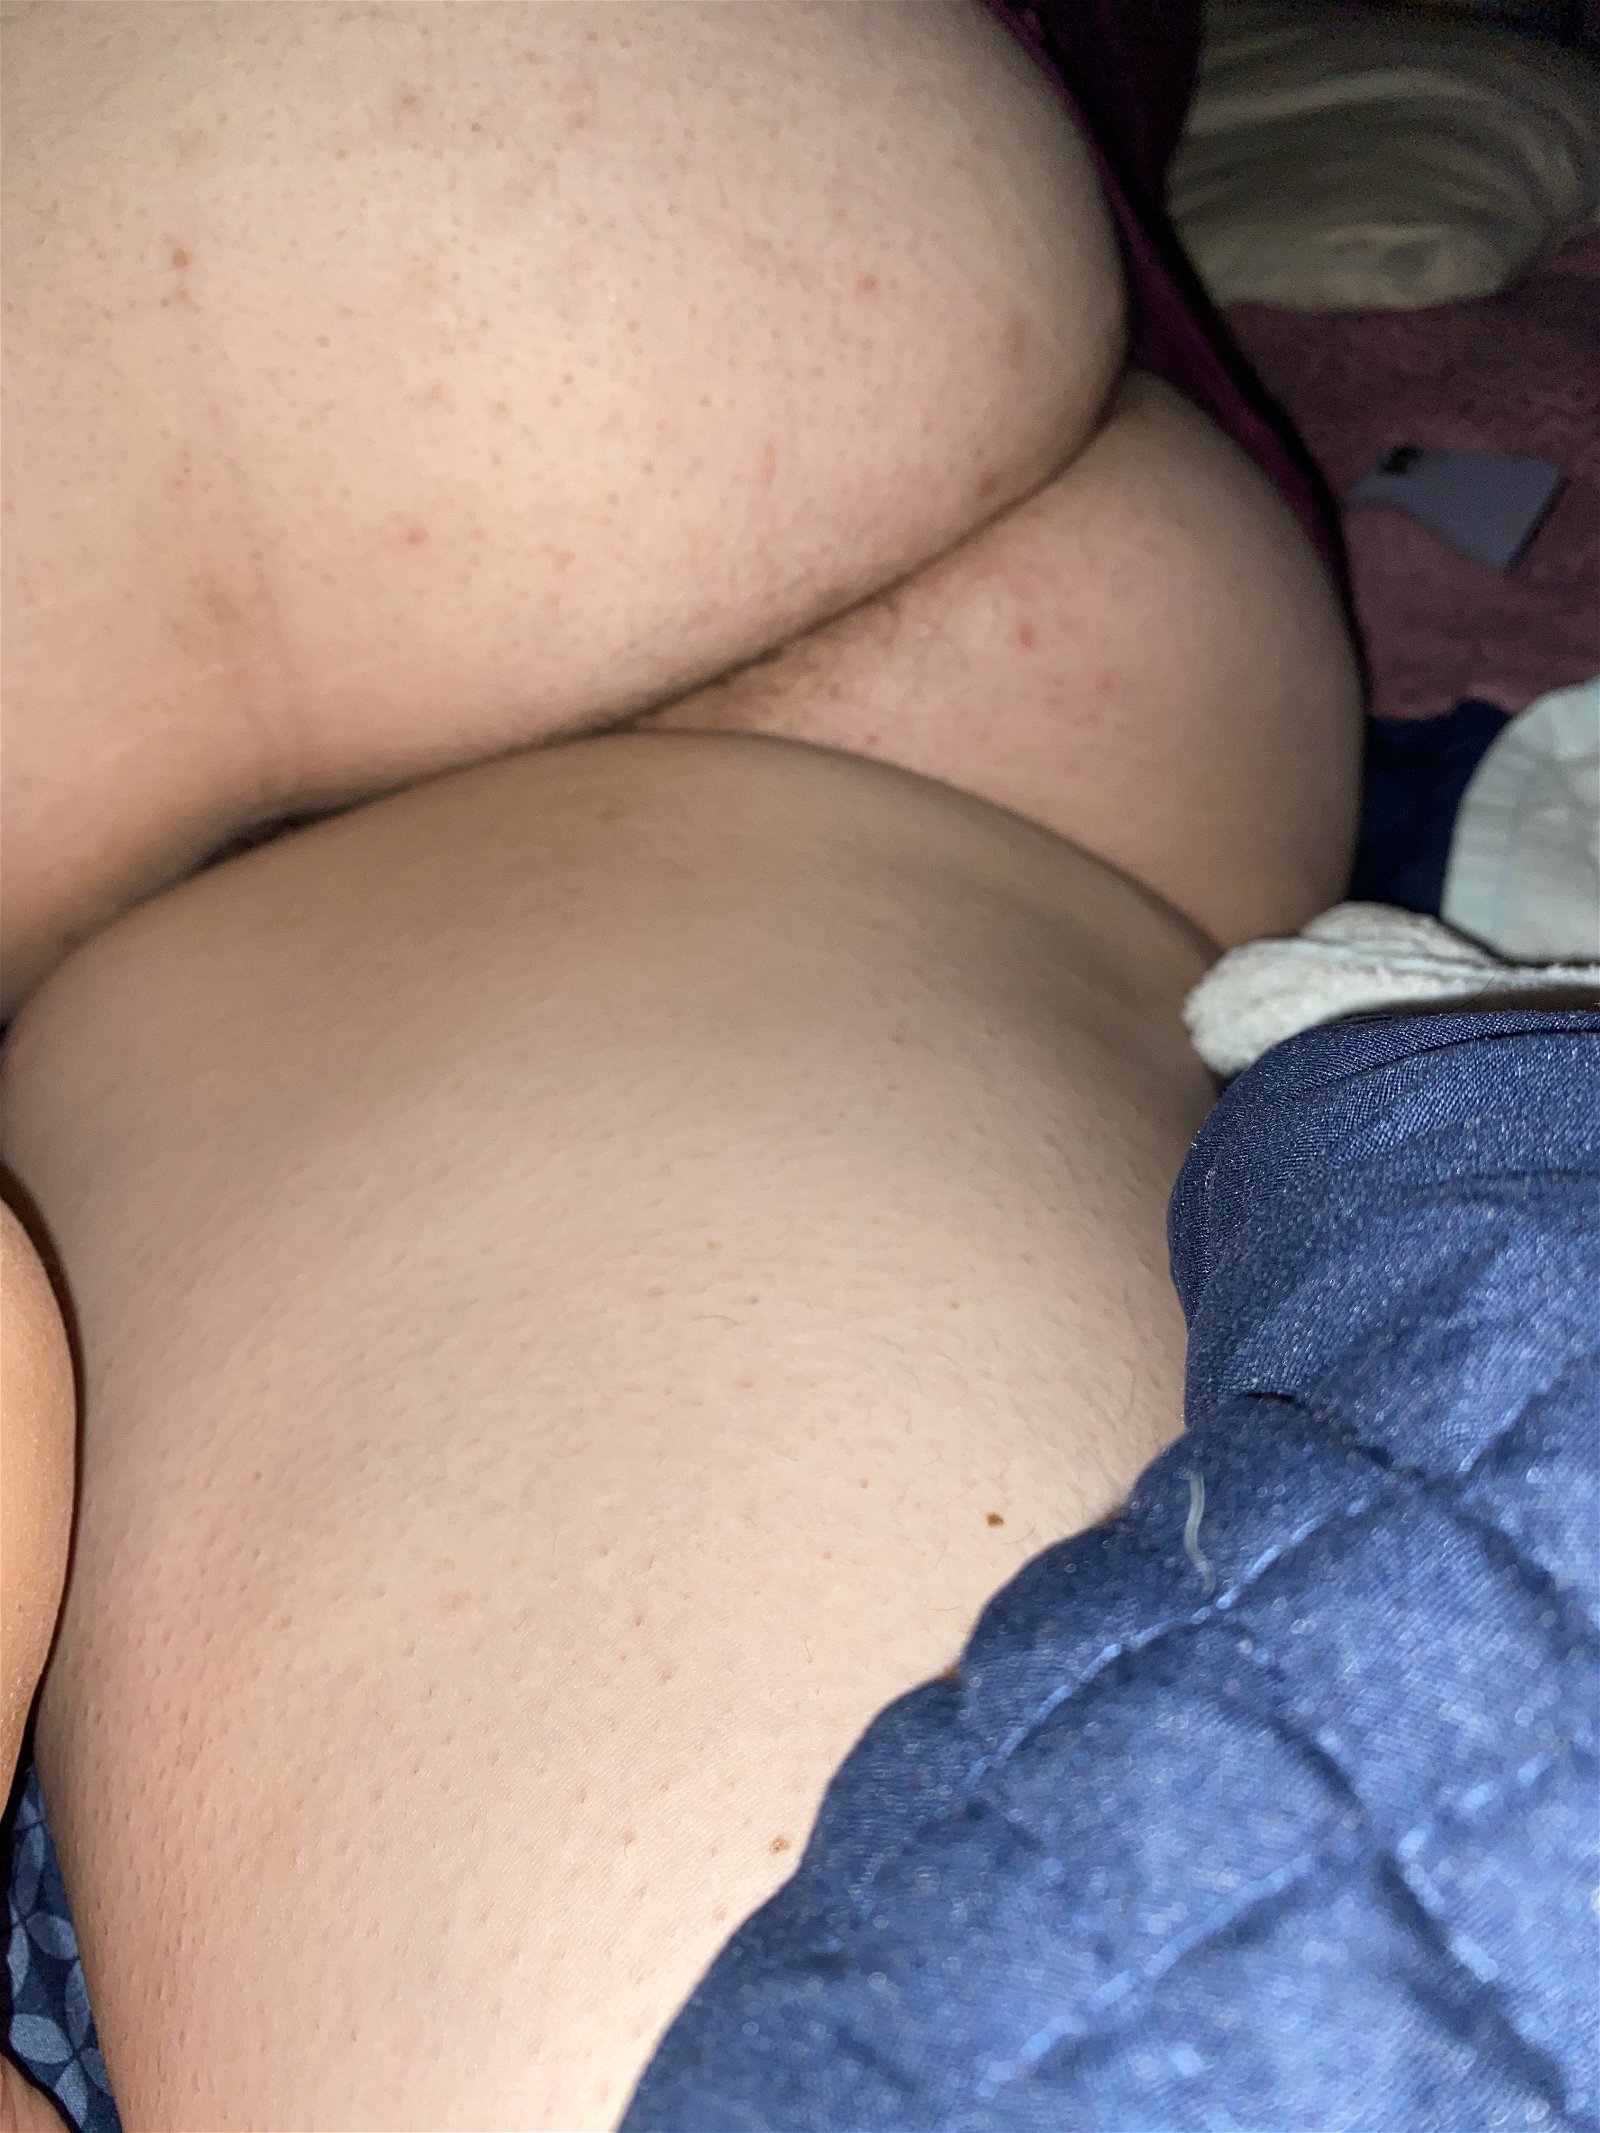 Watch the Photo by Bigdick2664 with the username @Bigdick2664, posted on May 17, 2022. The post is about the topic BBW and Chubby. and the text says 'My fat slut wife y'all enjoy that fat pussy'